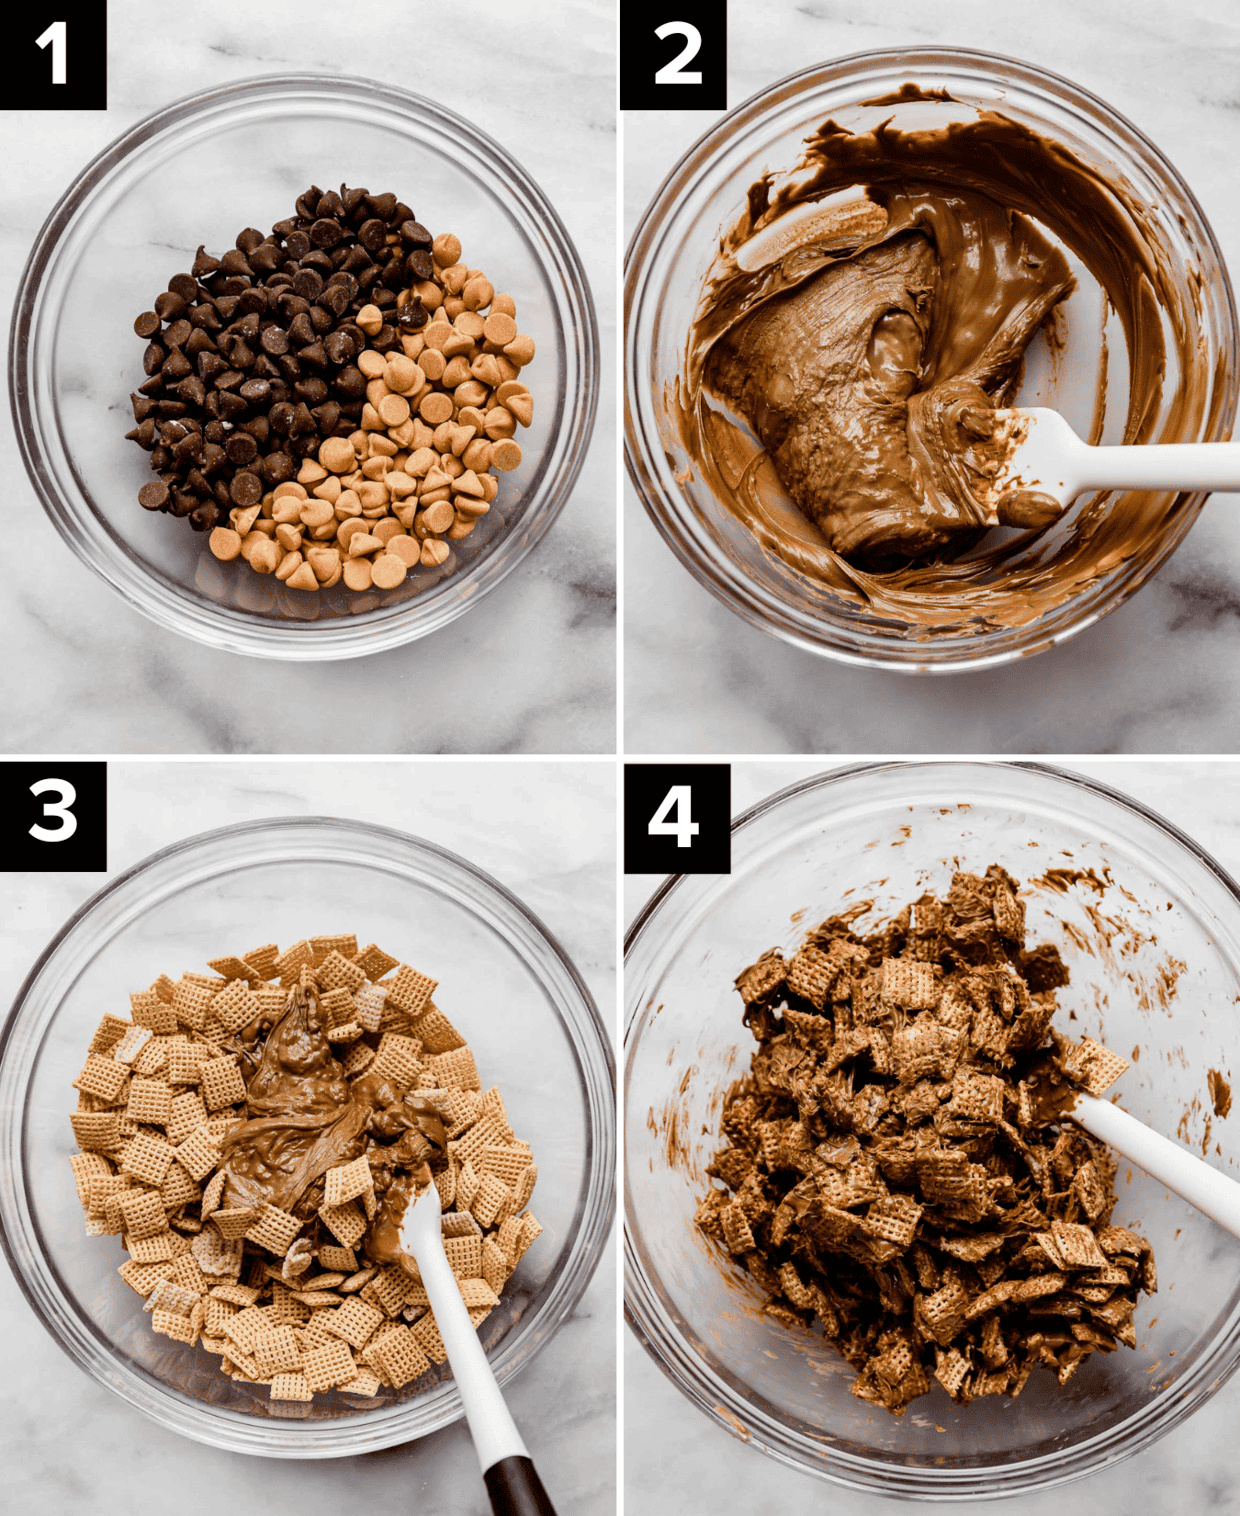 Four photos showing how to make Scotcheroo puppy chow (Butterscotch Puppy Chow) top left is chocolate chips and butterscotch chips in a glass bowl, top right is melted chocolate in glass bowl, bottom left is melted chocolate over top Chex cereal in a glass bowl, bottom right is butterscotch and chocolate coated Chex cereal in a glass bowl.